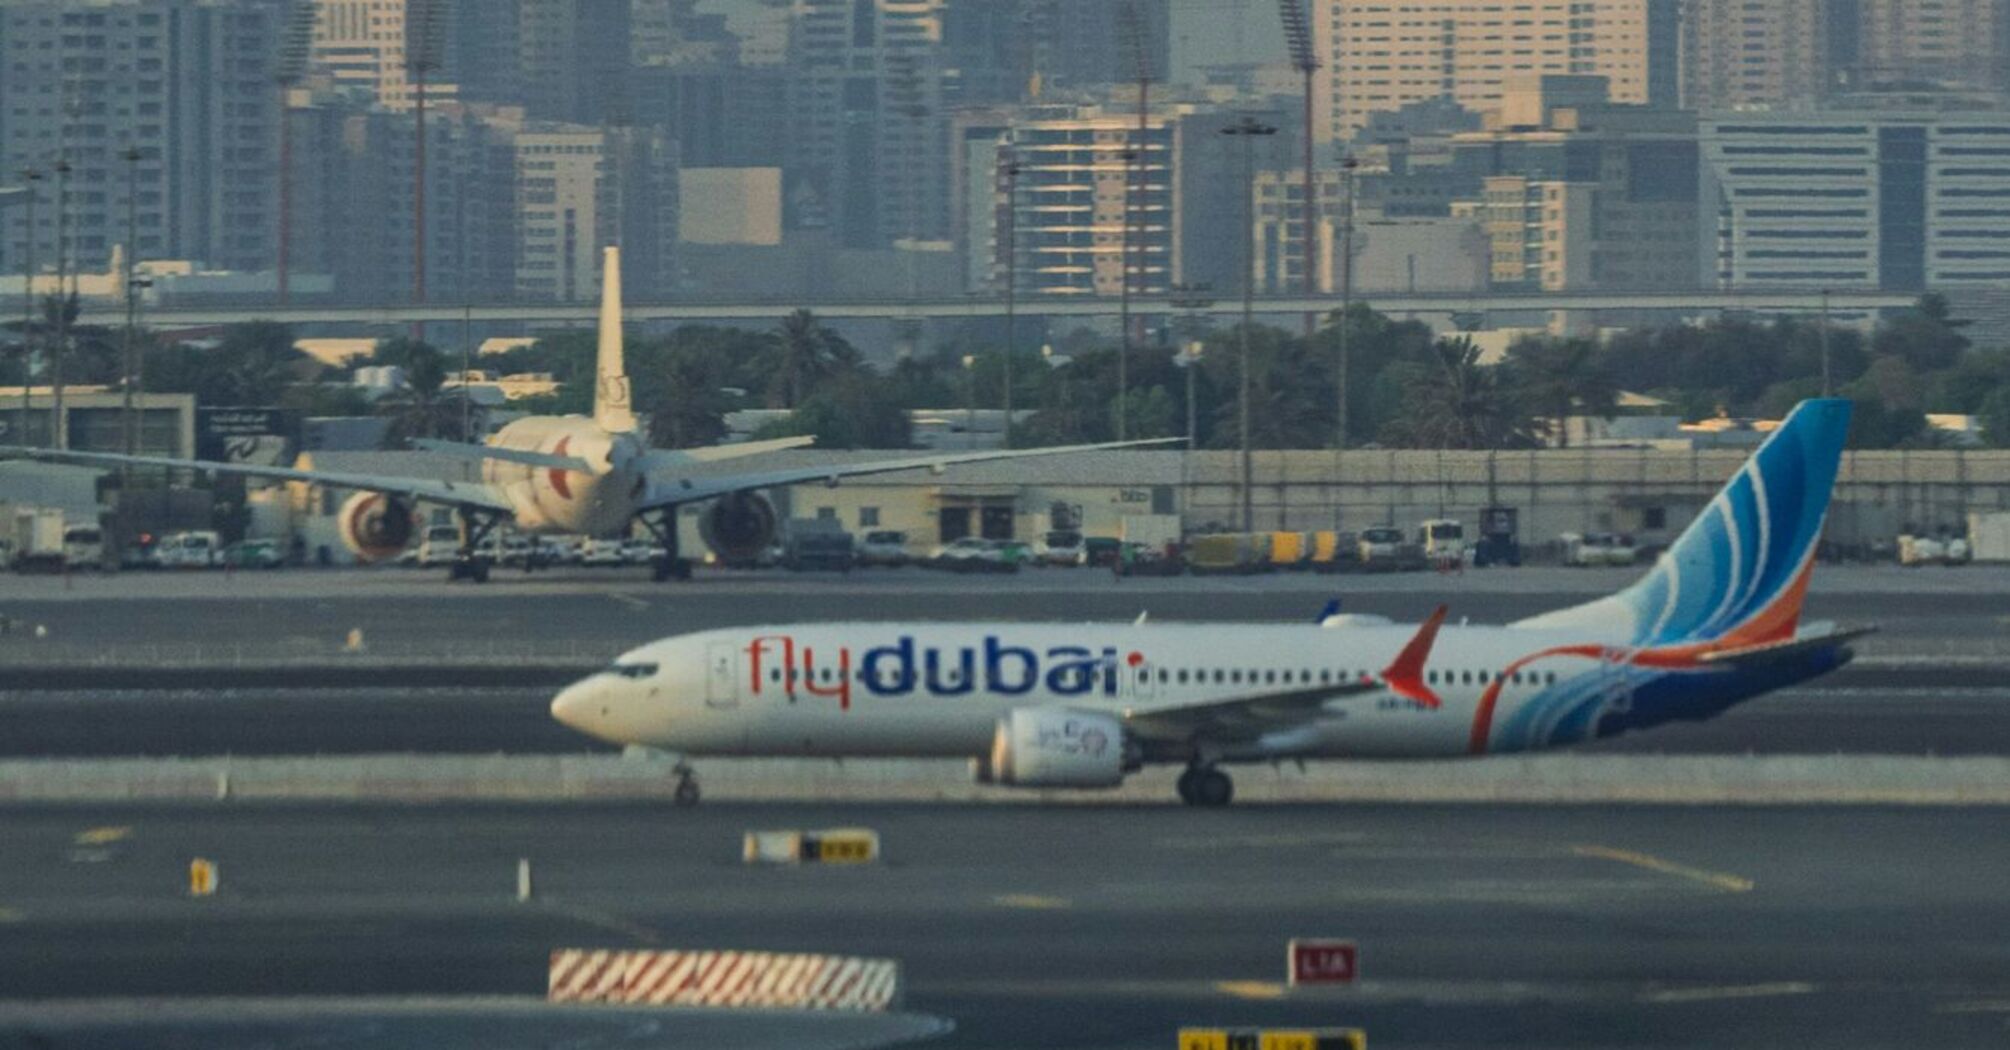 A flydubai aircraft on the tarmac Airport with the city's skyline in the background during dusk